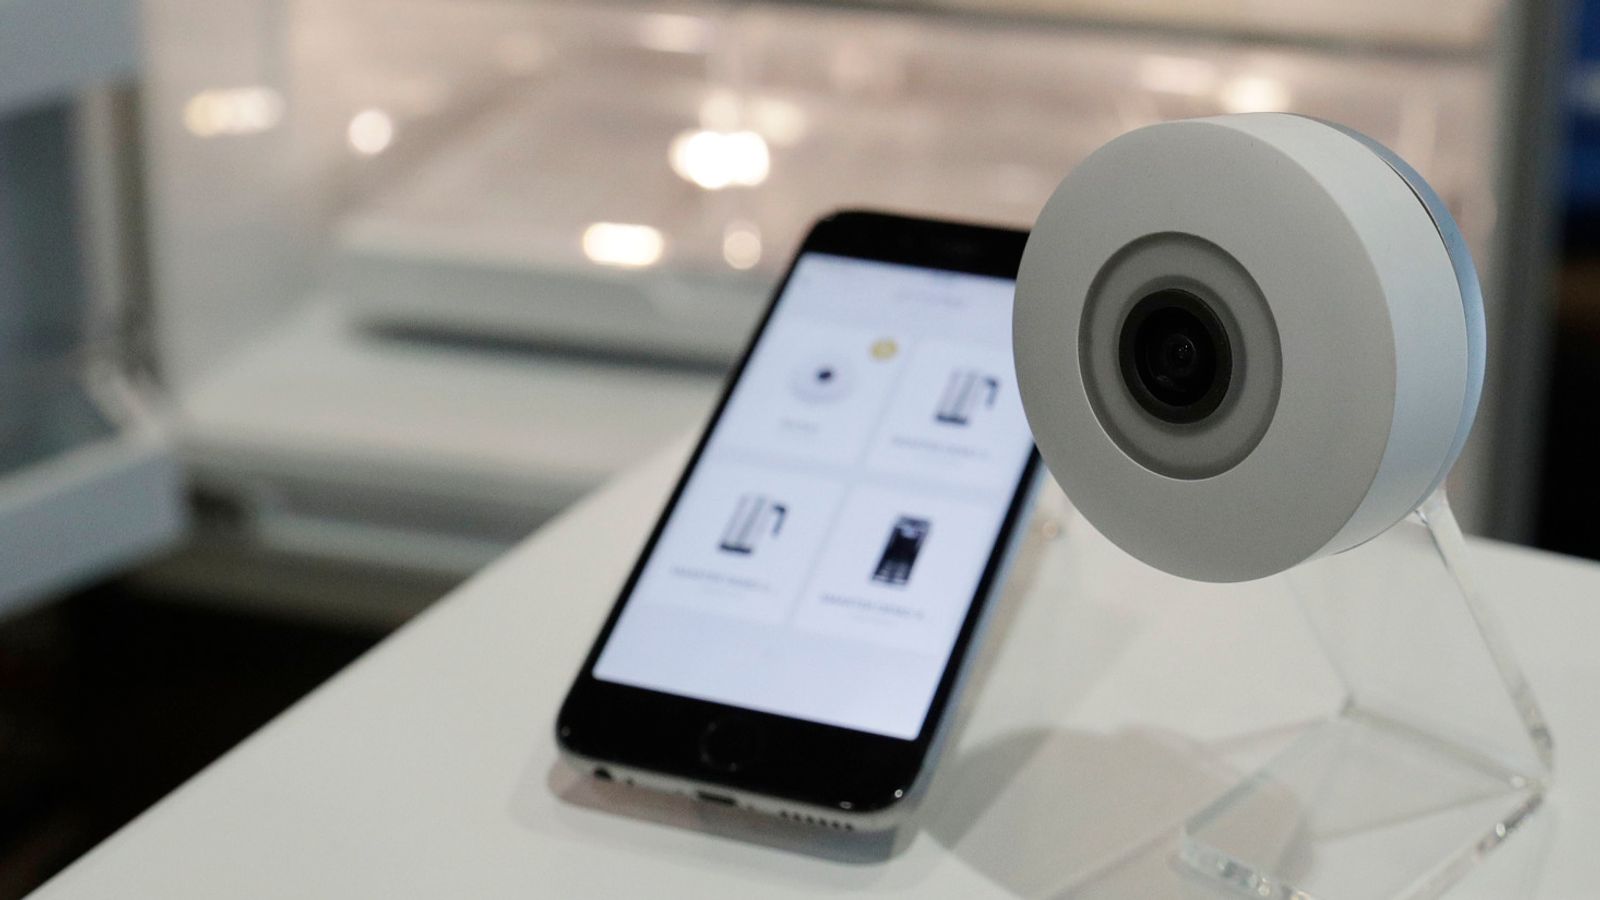 More than 83 million smart devices, including baby monitors, at risk from hackers